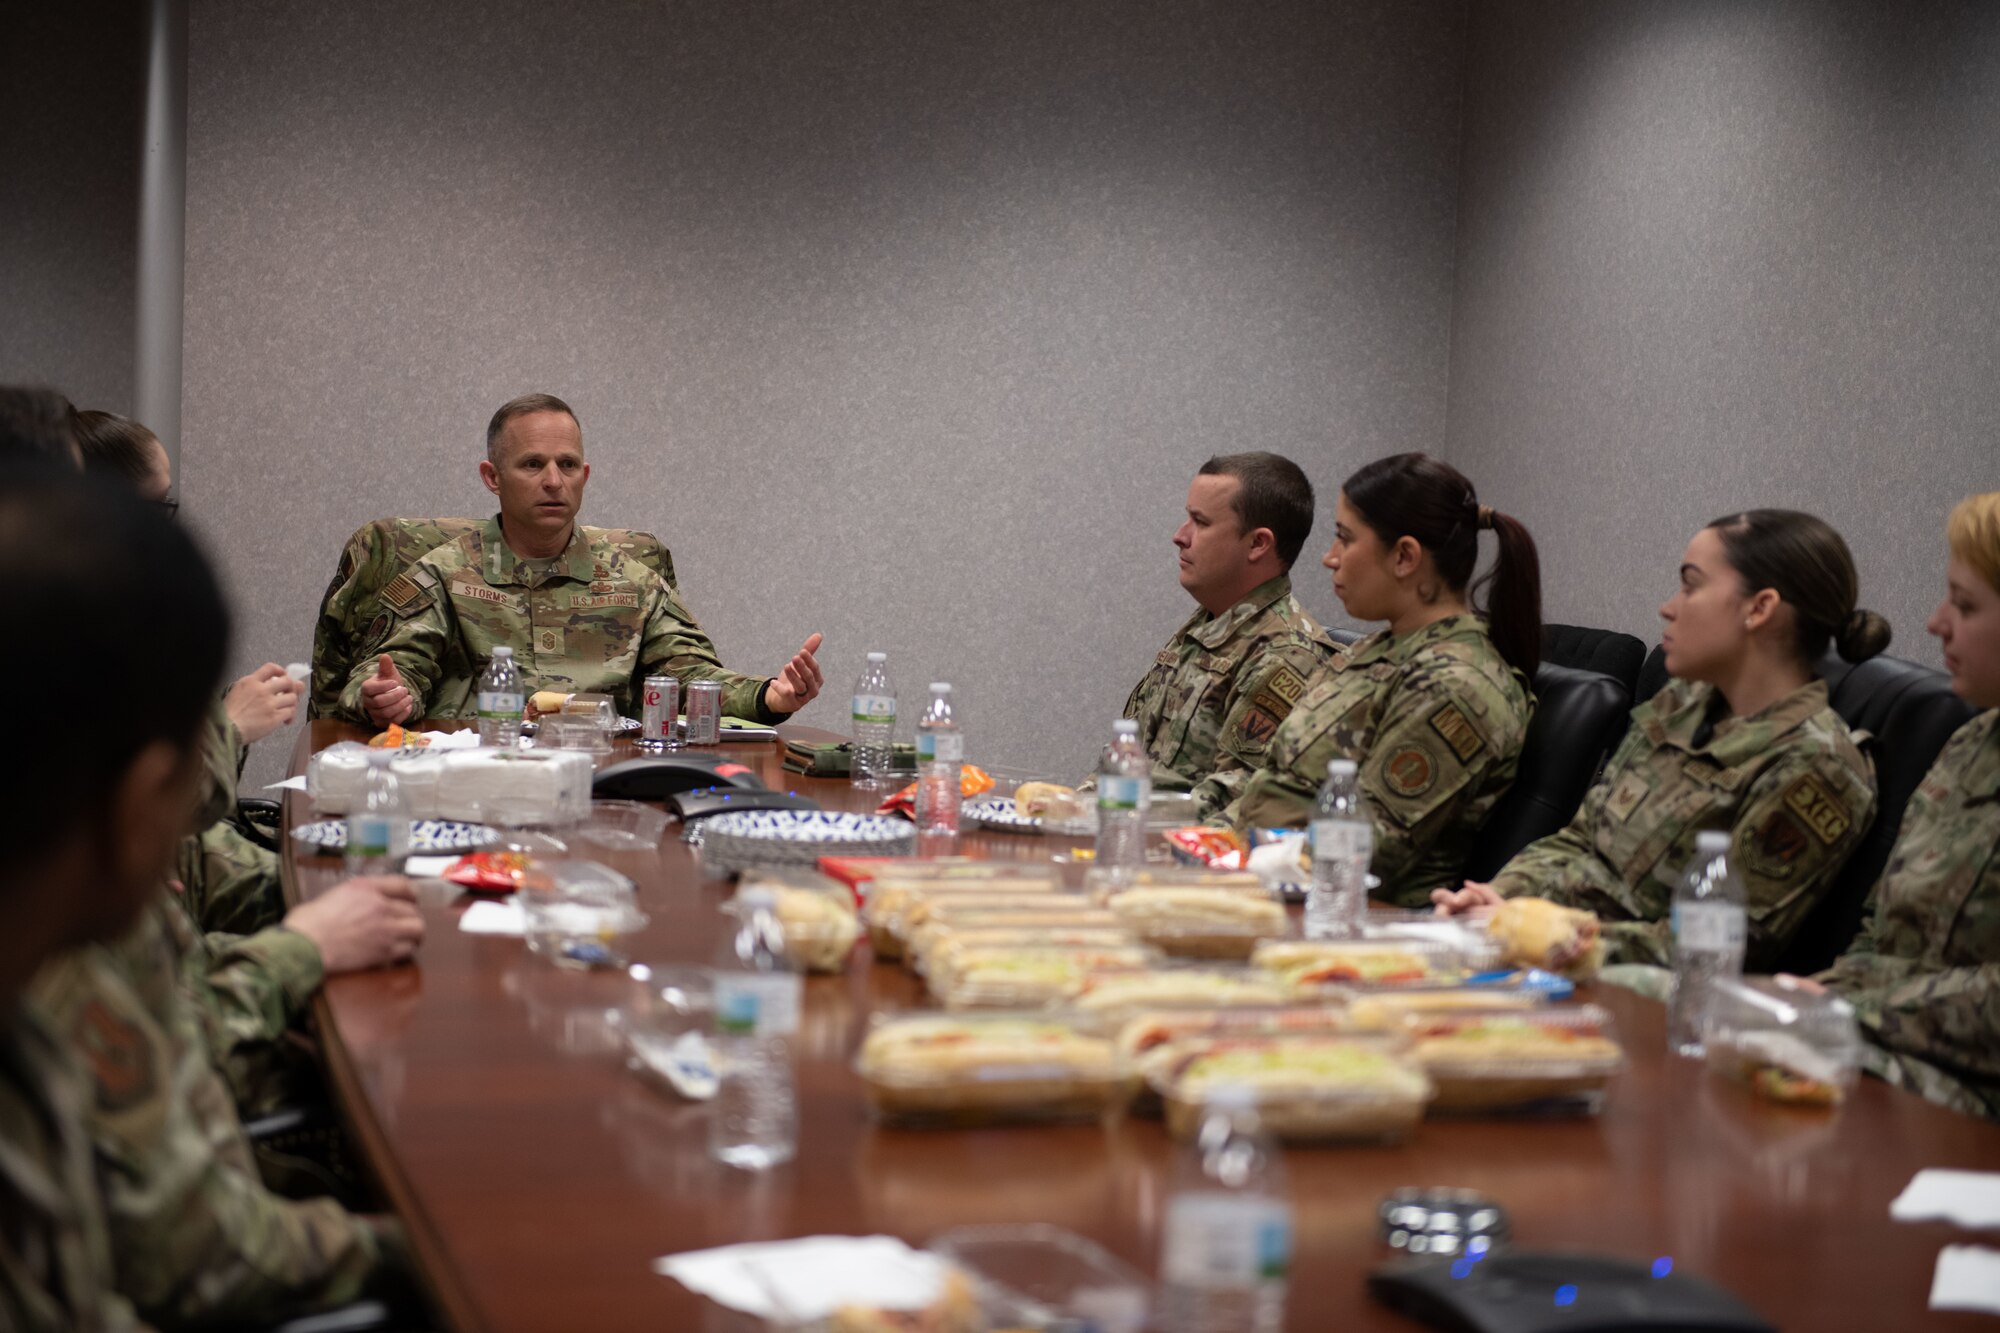 Airmen eat food at conference room.